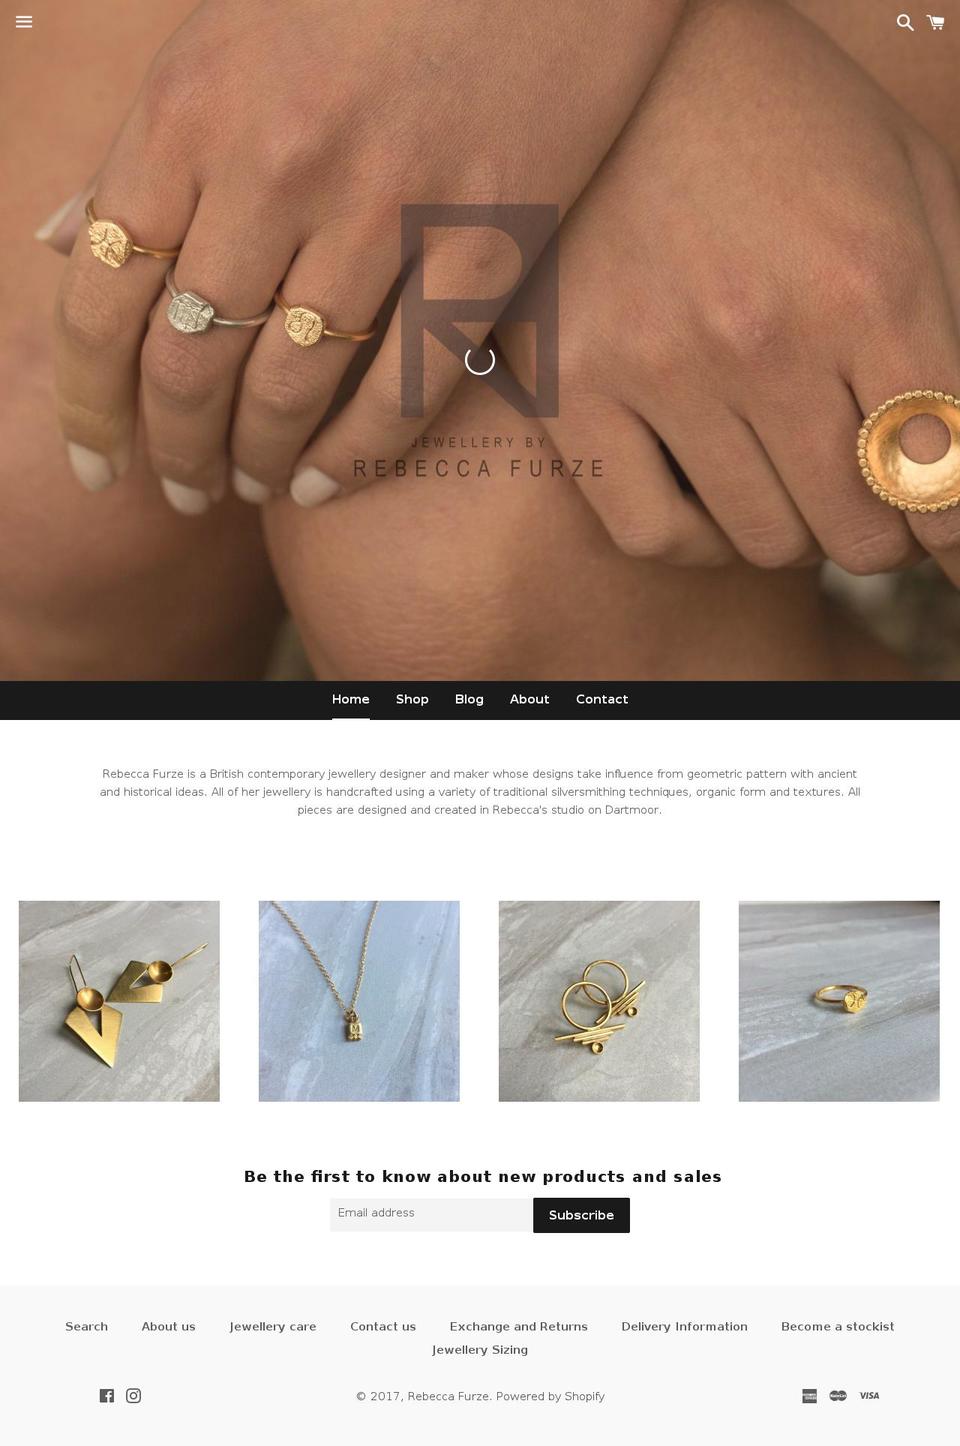 Craft Shopify theme site example rebeccafurzejewellery.com